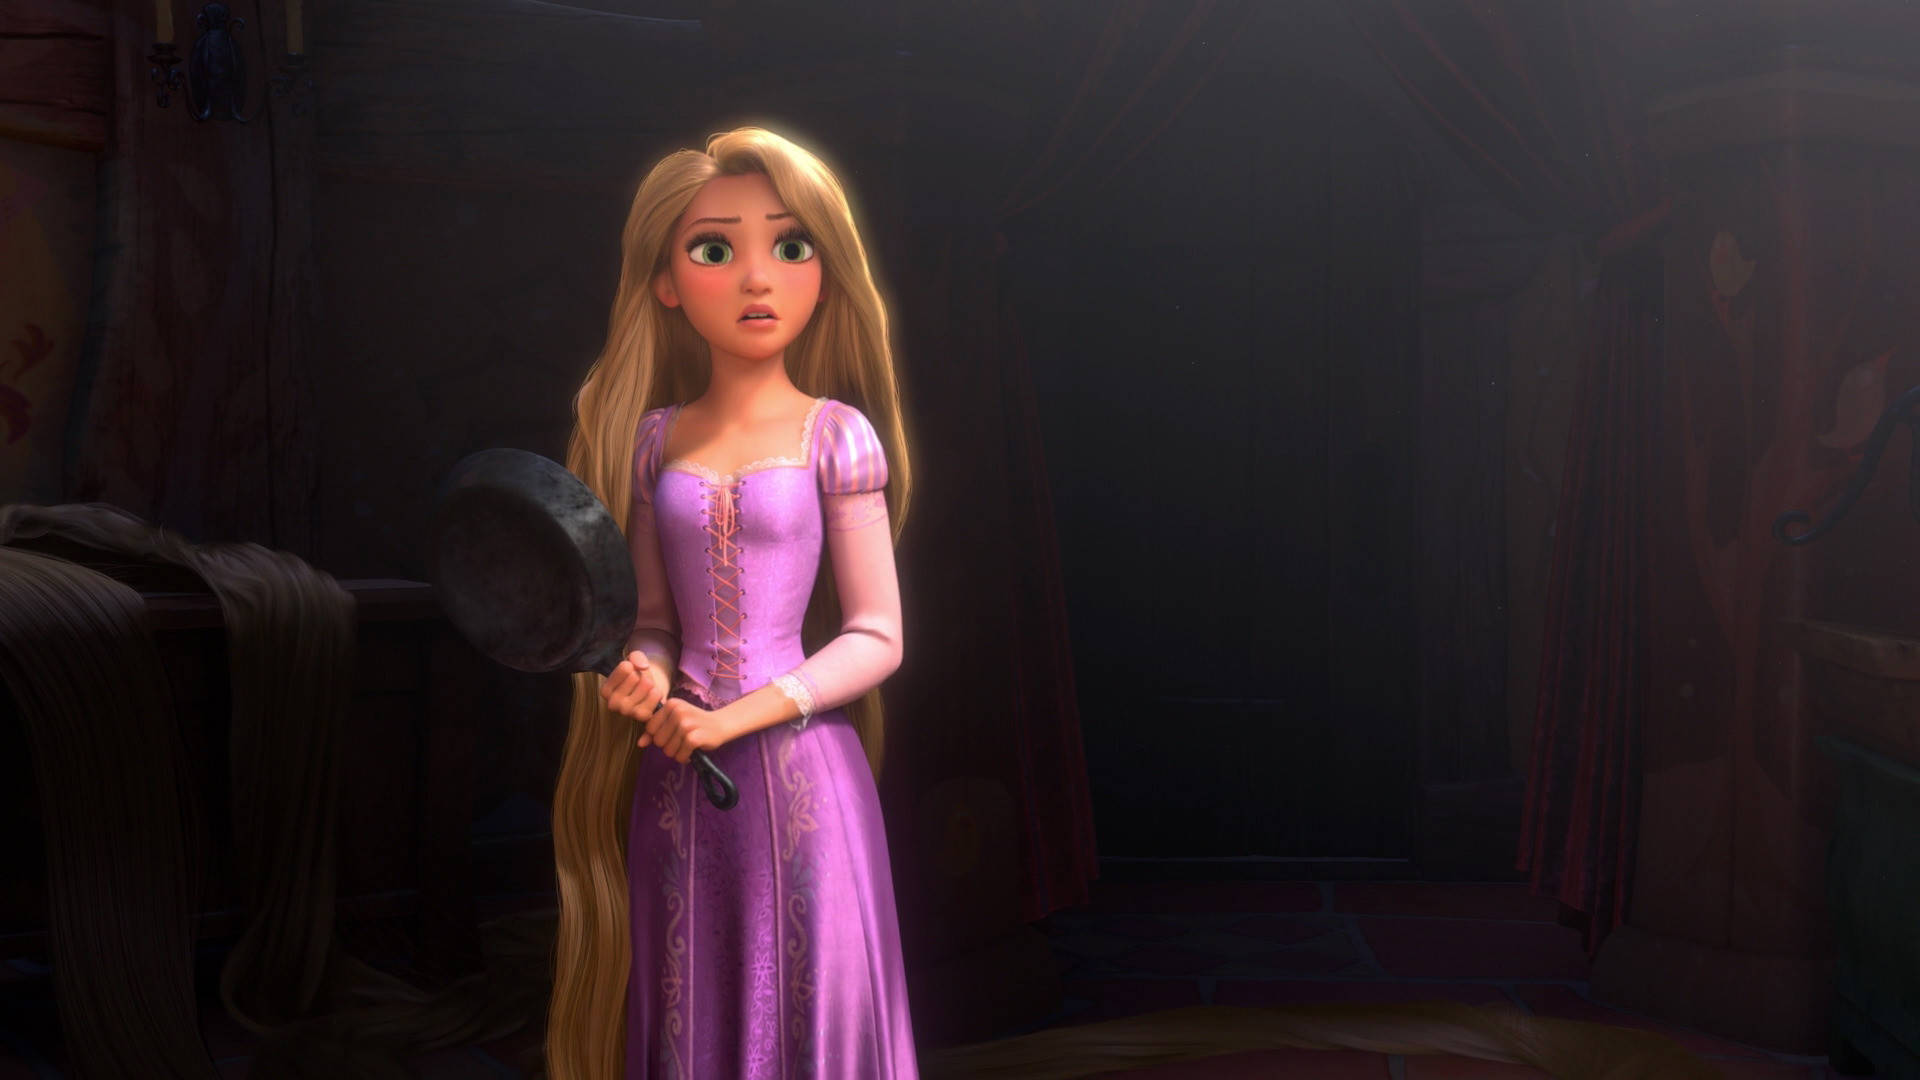 Disney's Rapunzel Holds A Frying Pan In One Hand While The Other Reaches For The Sky Background